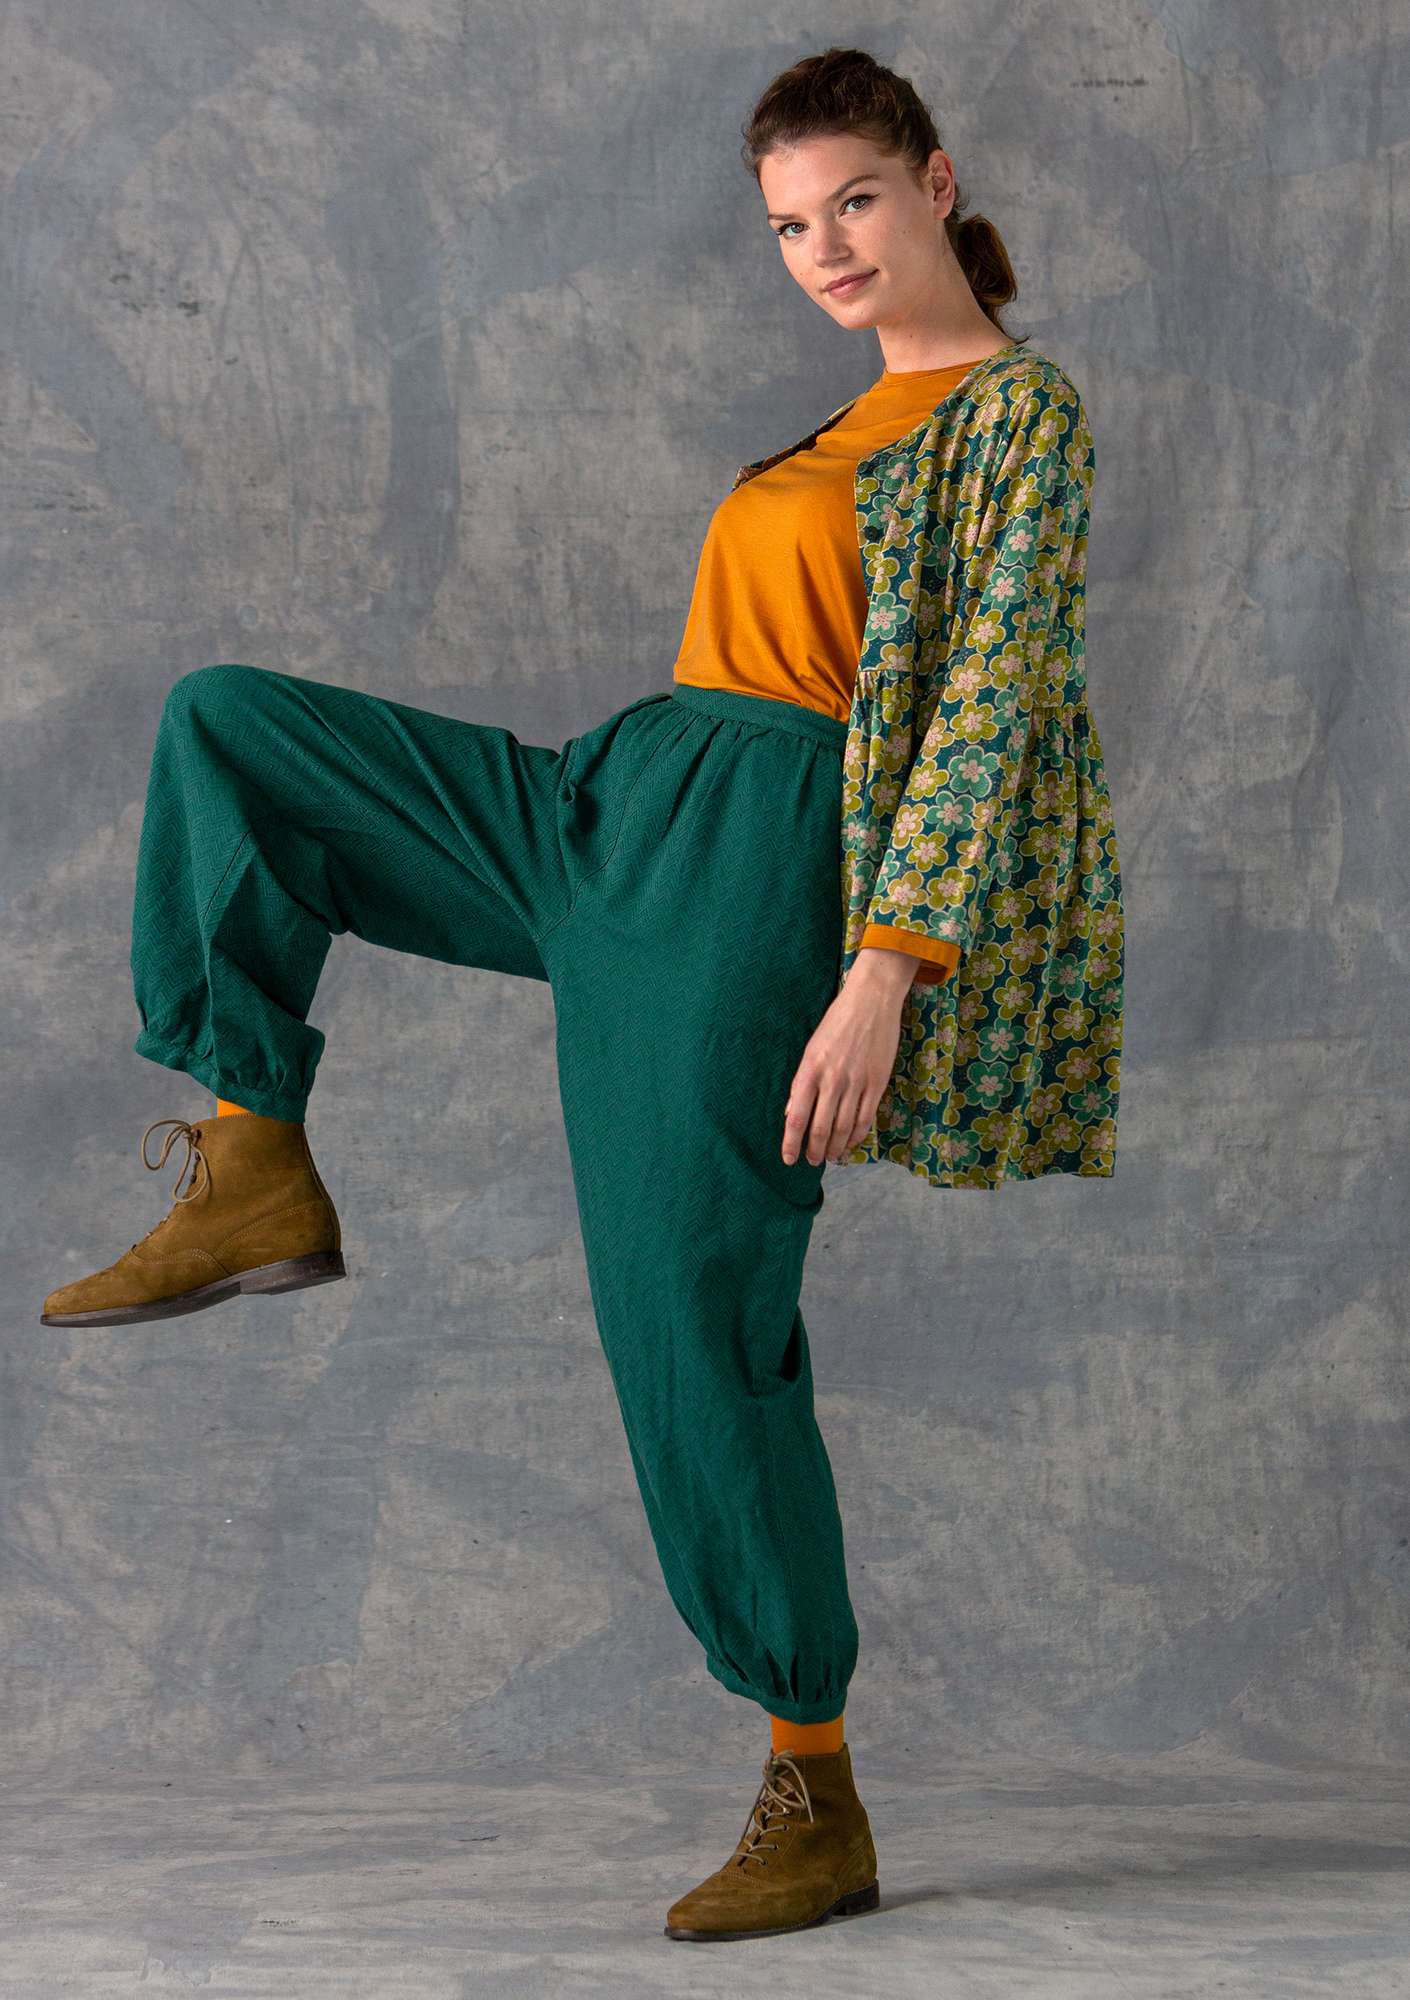 Trousers in a woven cotton/linen blend peacock green